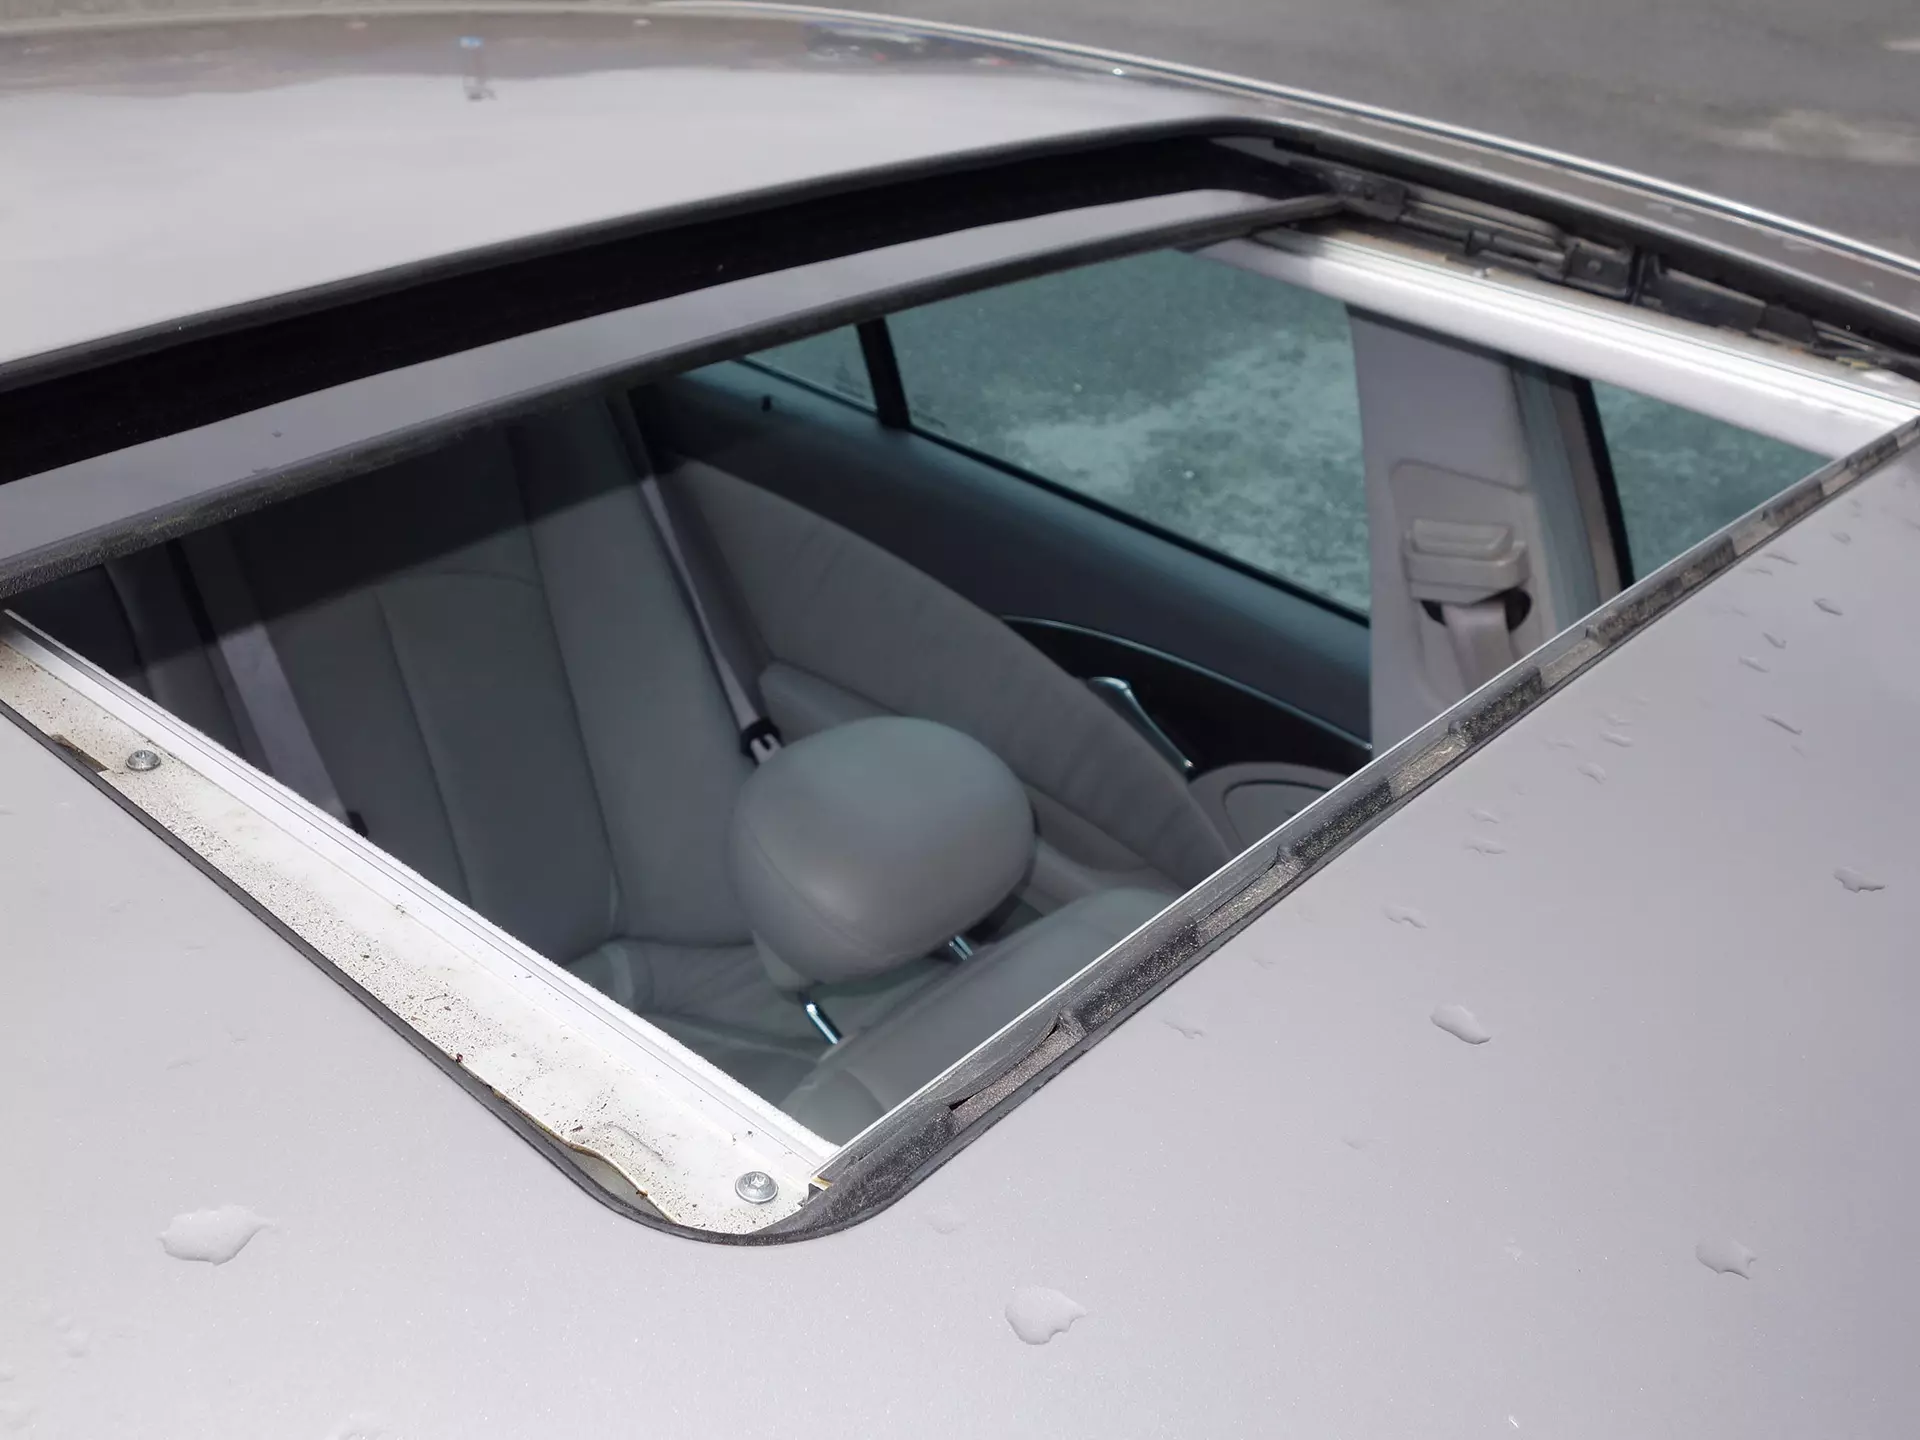 Sunroof drain cleaning! Because a water filled automobile isn't